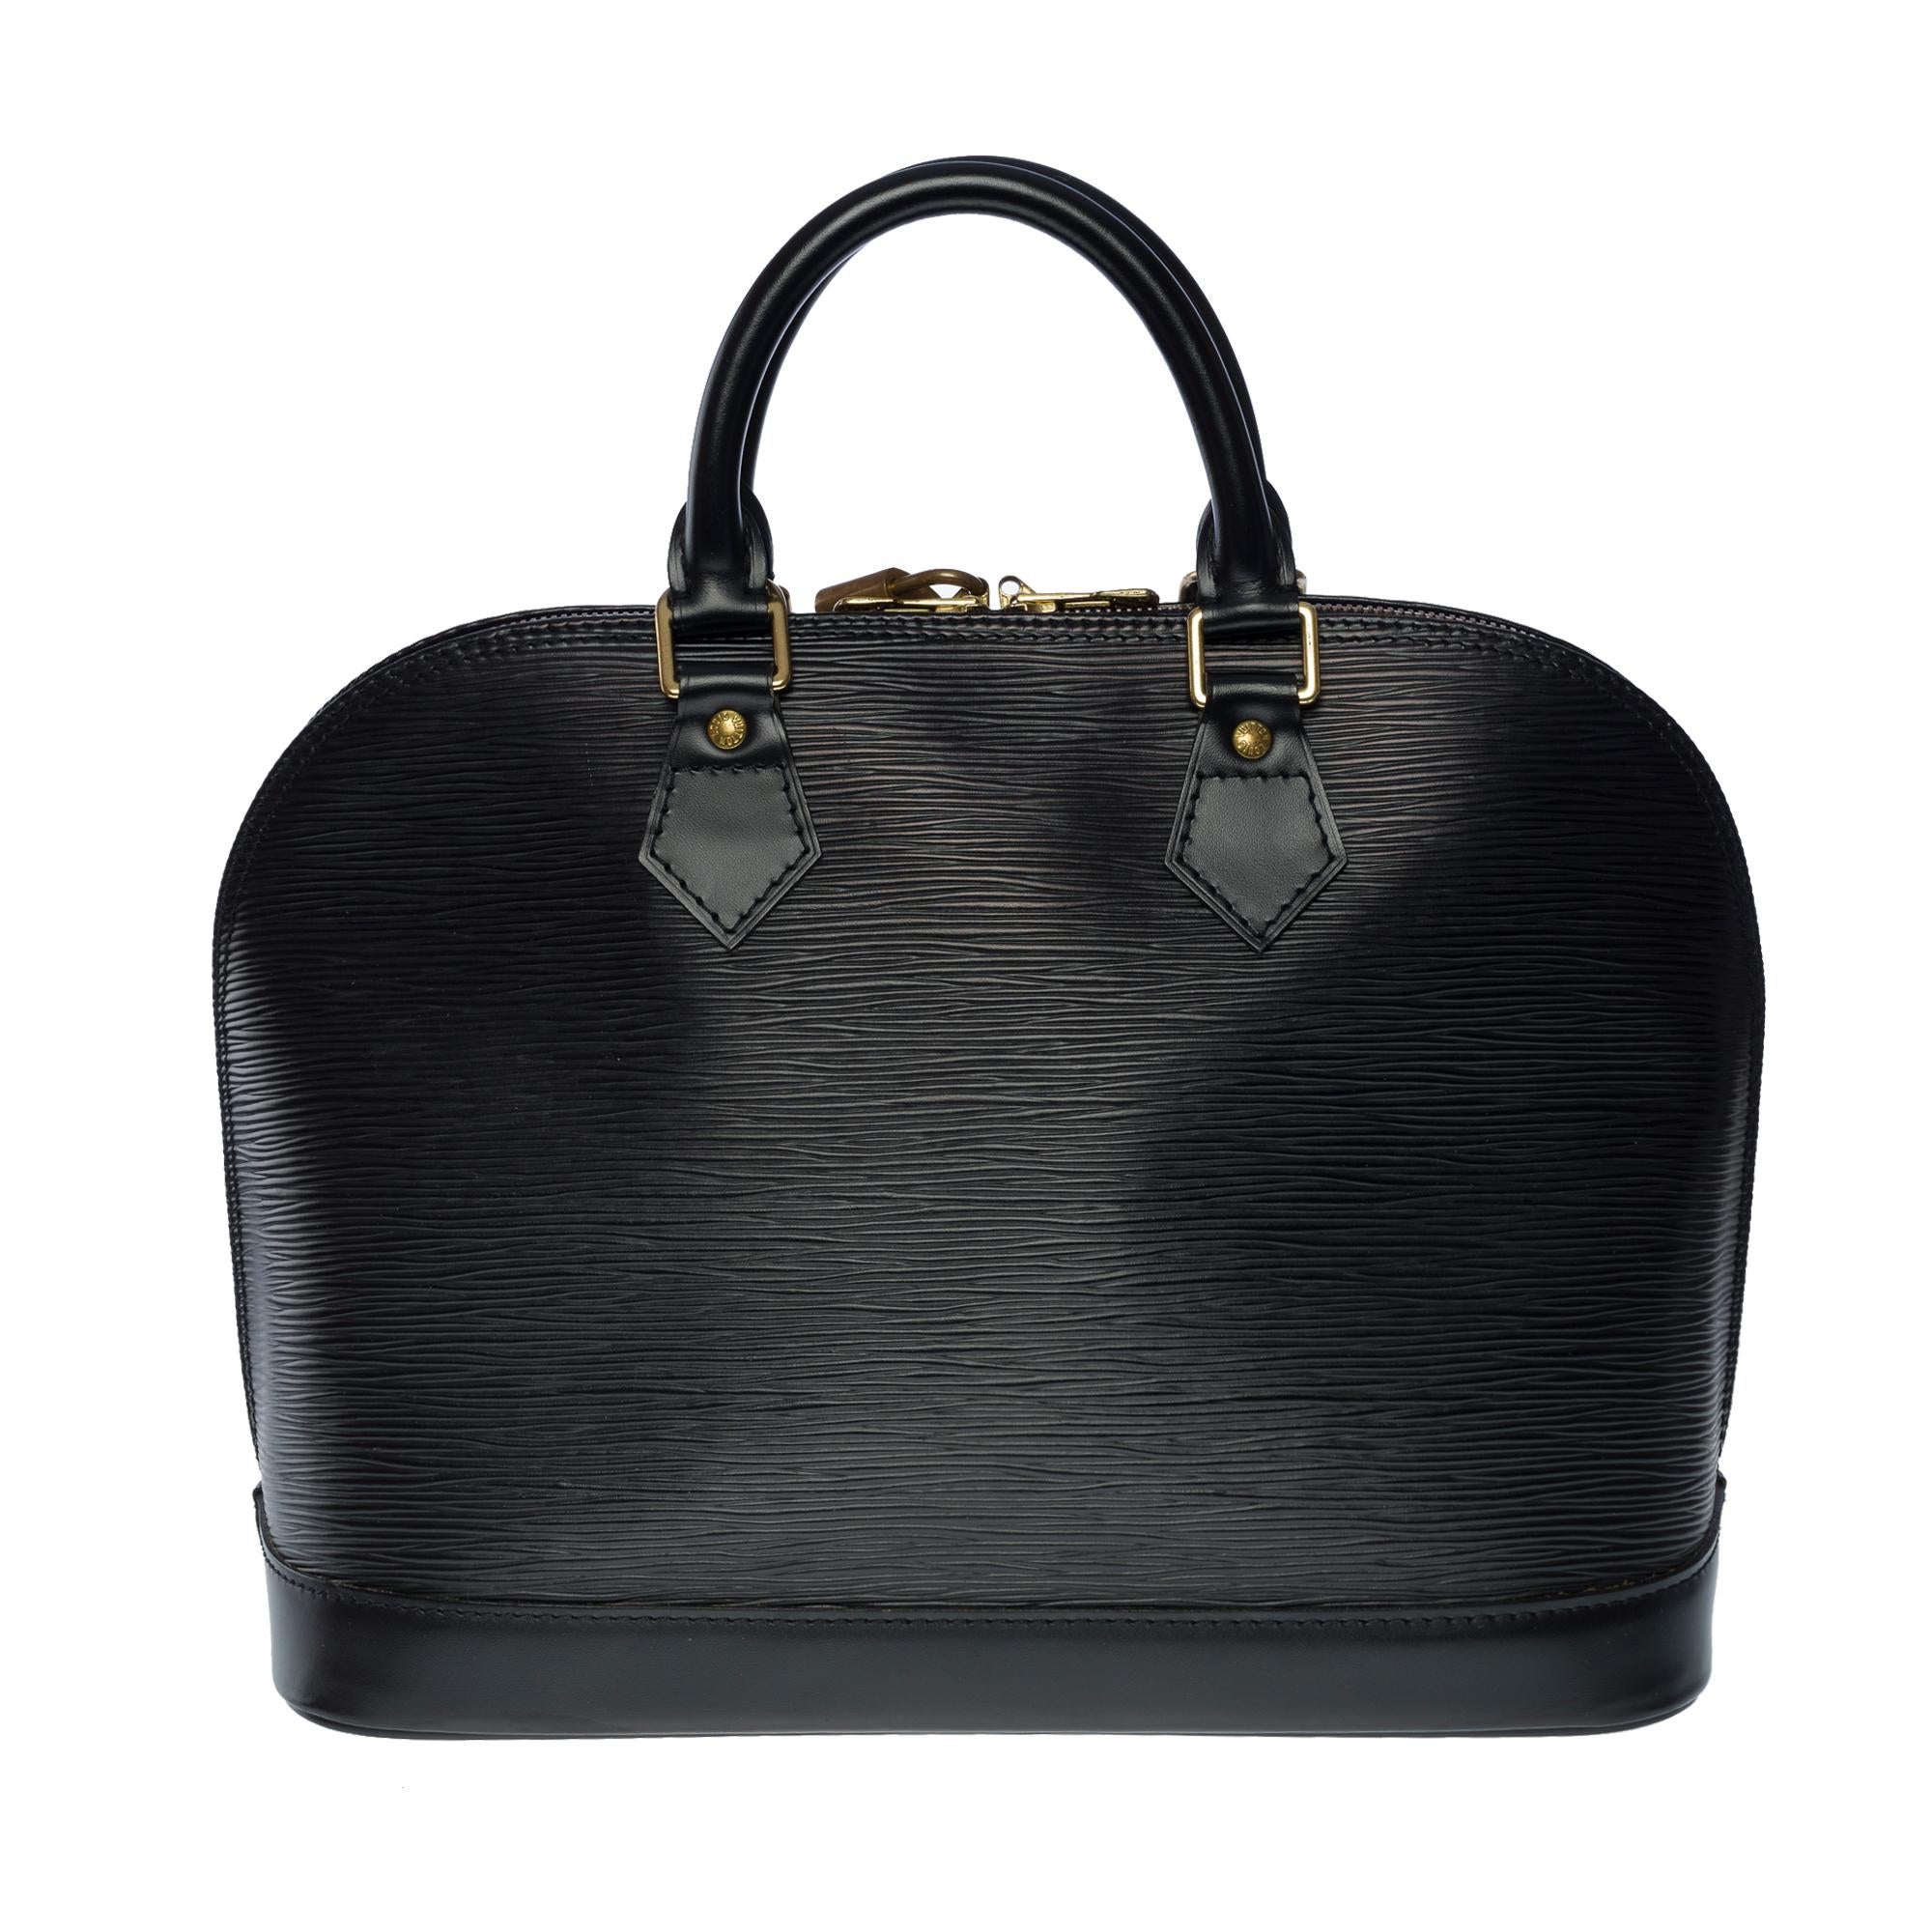 Very Chic Louis Vuitton Alma handbag in black epi leather, gold-plated metal hardware, double black leather handle for a hand-held

Double zip closure
Black canvas lining, one patch pocket
Date: 1998
Dimensions: 30 X 25 x 16 cm (11,8 x 9,8 x 6,3